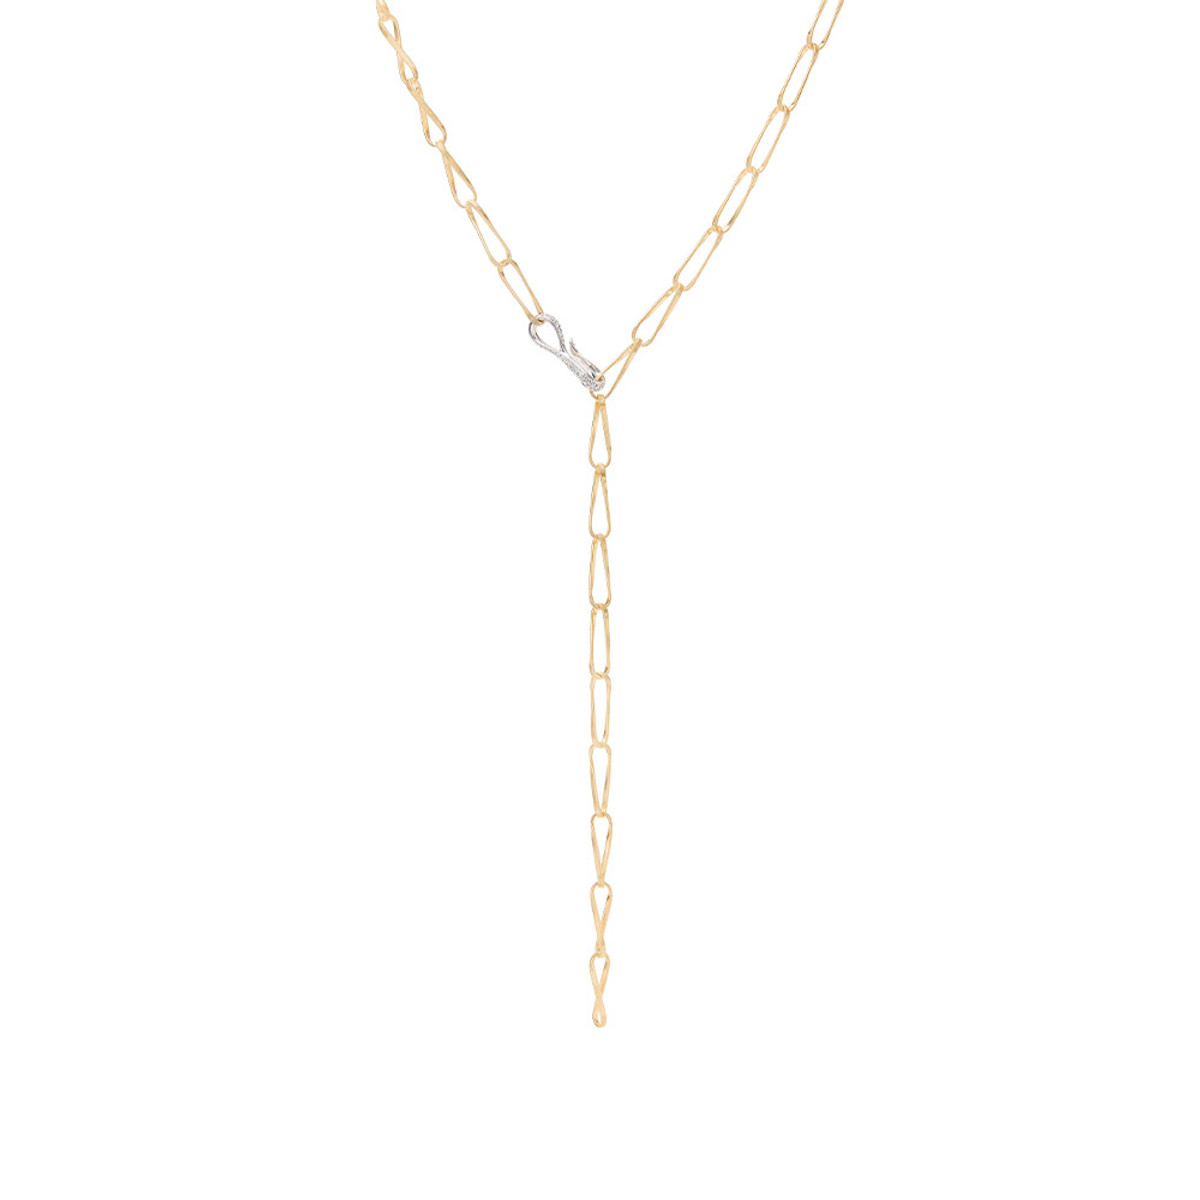 Marco Bicego Marrakech Collection 18K Yellow Gold Onde Diamond Hand Twisted Lariat Link Necklace-54256 Product Image